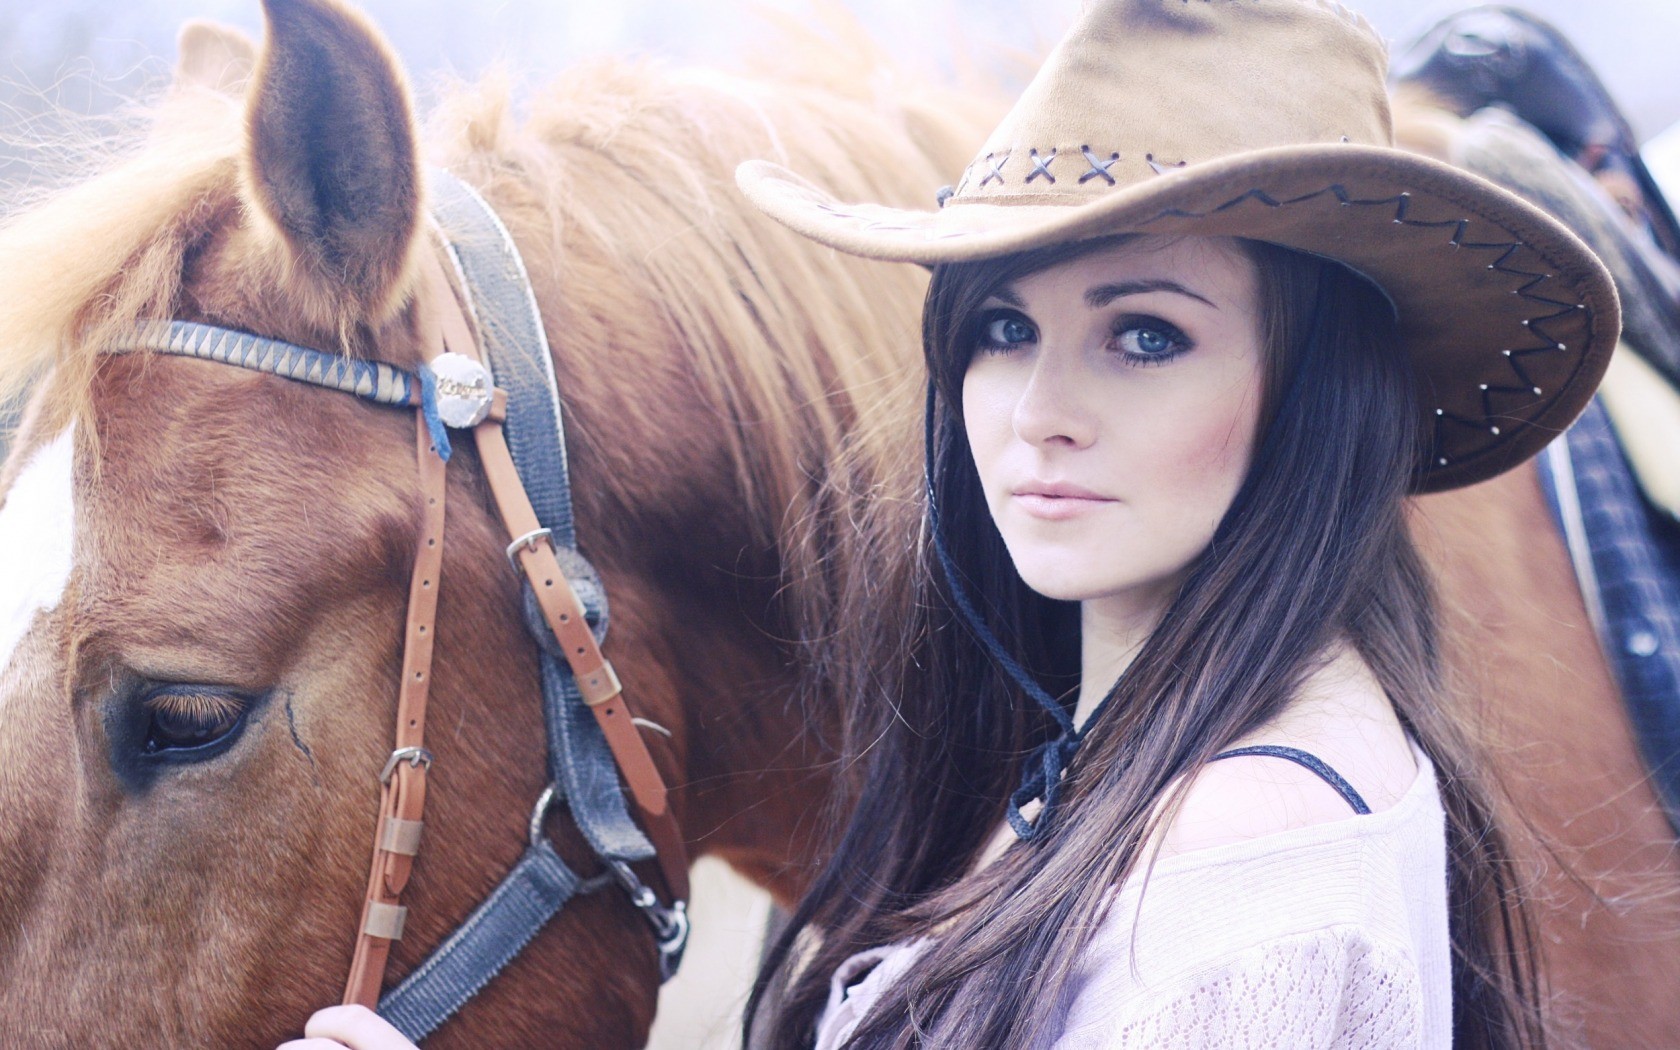 Women Cowgirl Hat Face Model Horse Animals Cow Girl Women With Horse Women With Hats Brunette Straig 1680x1050